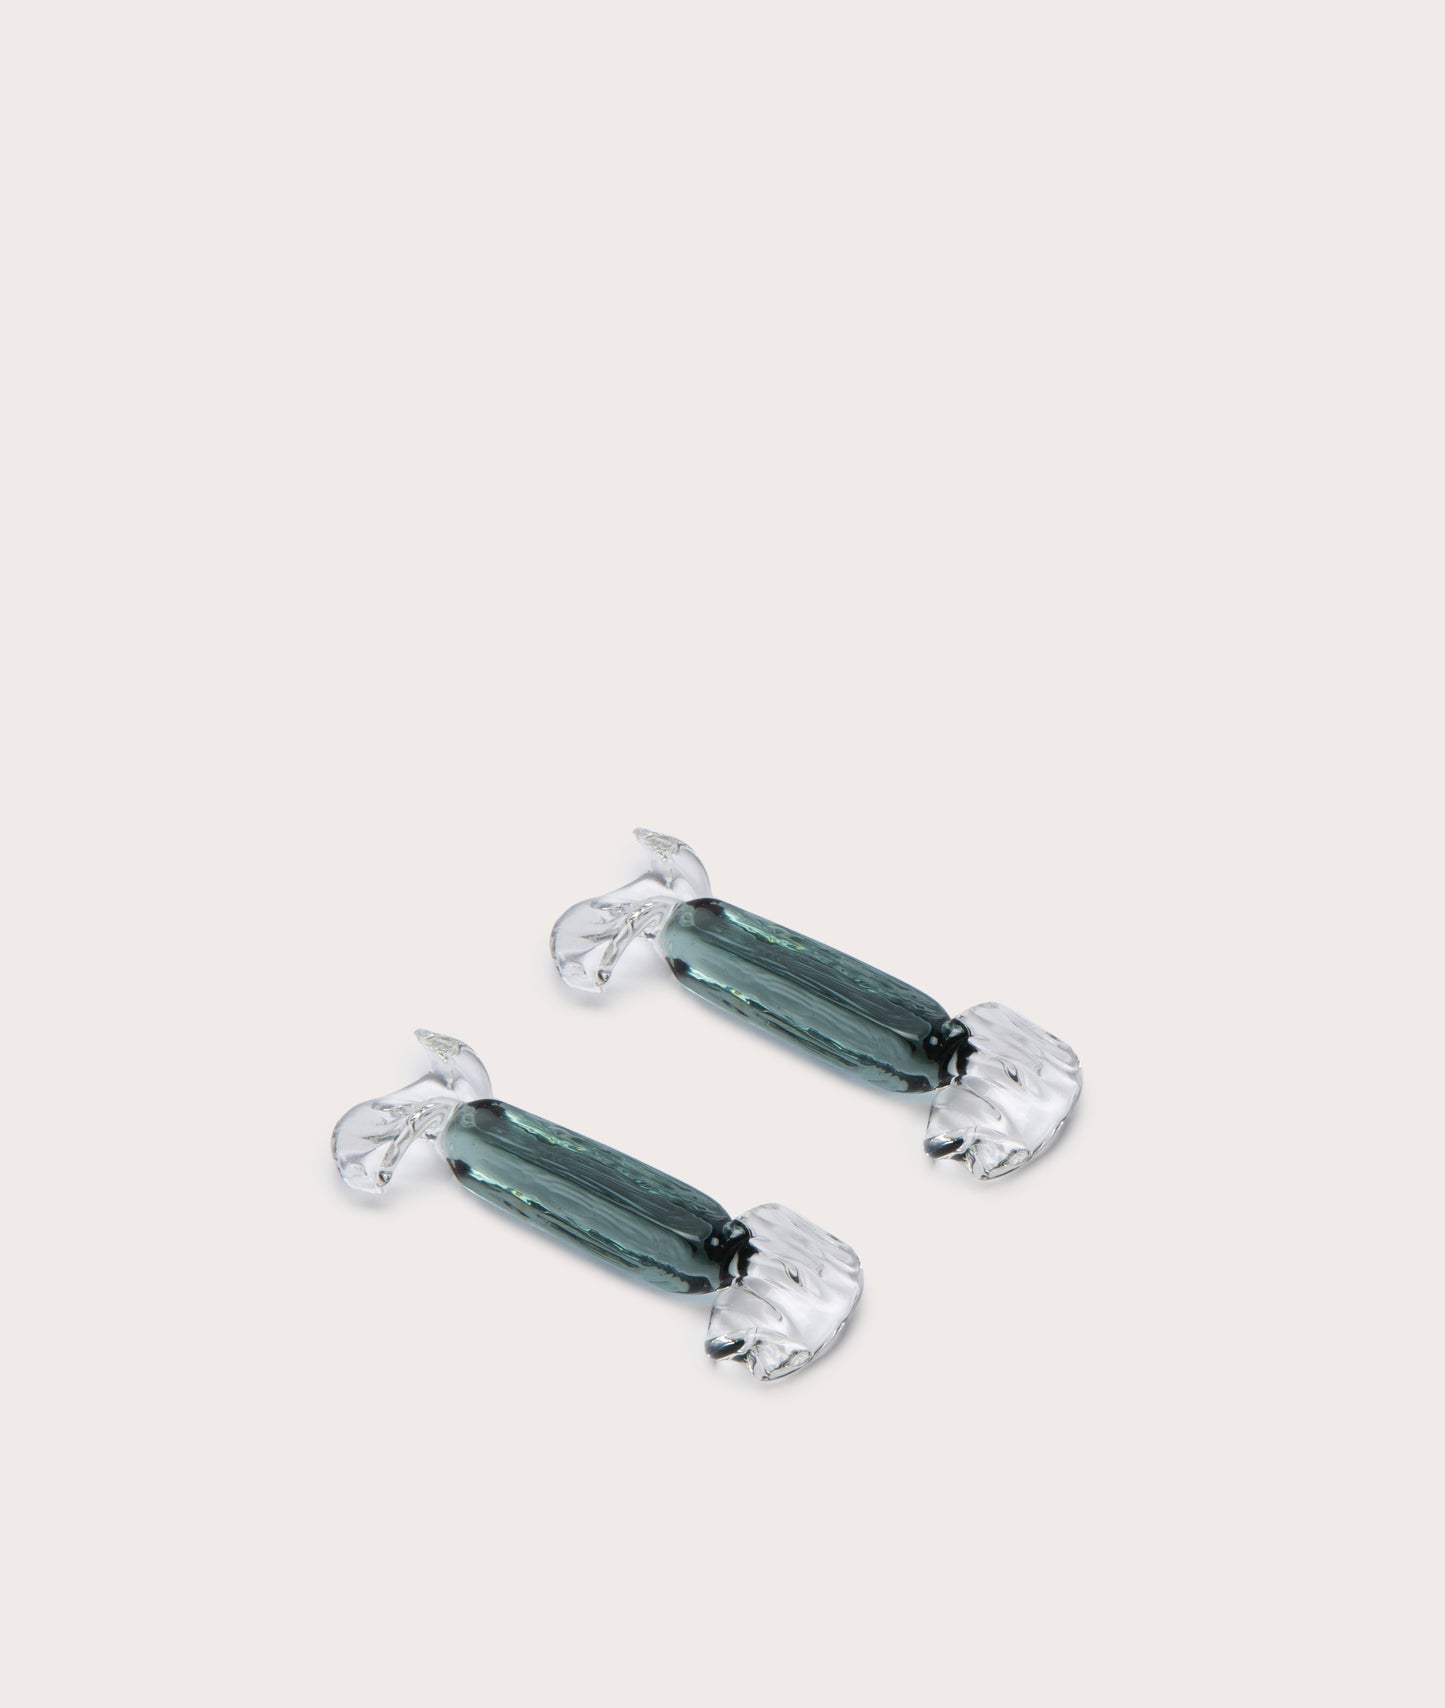 Cutlery Rest, Glass Candy - Pair